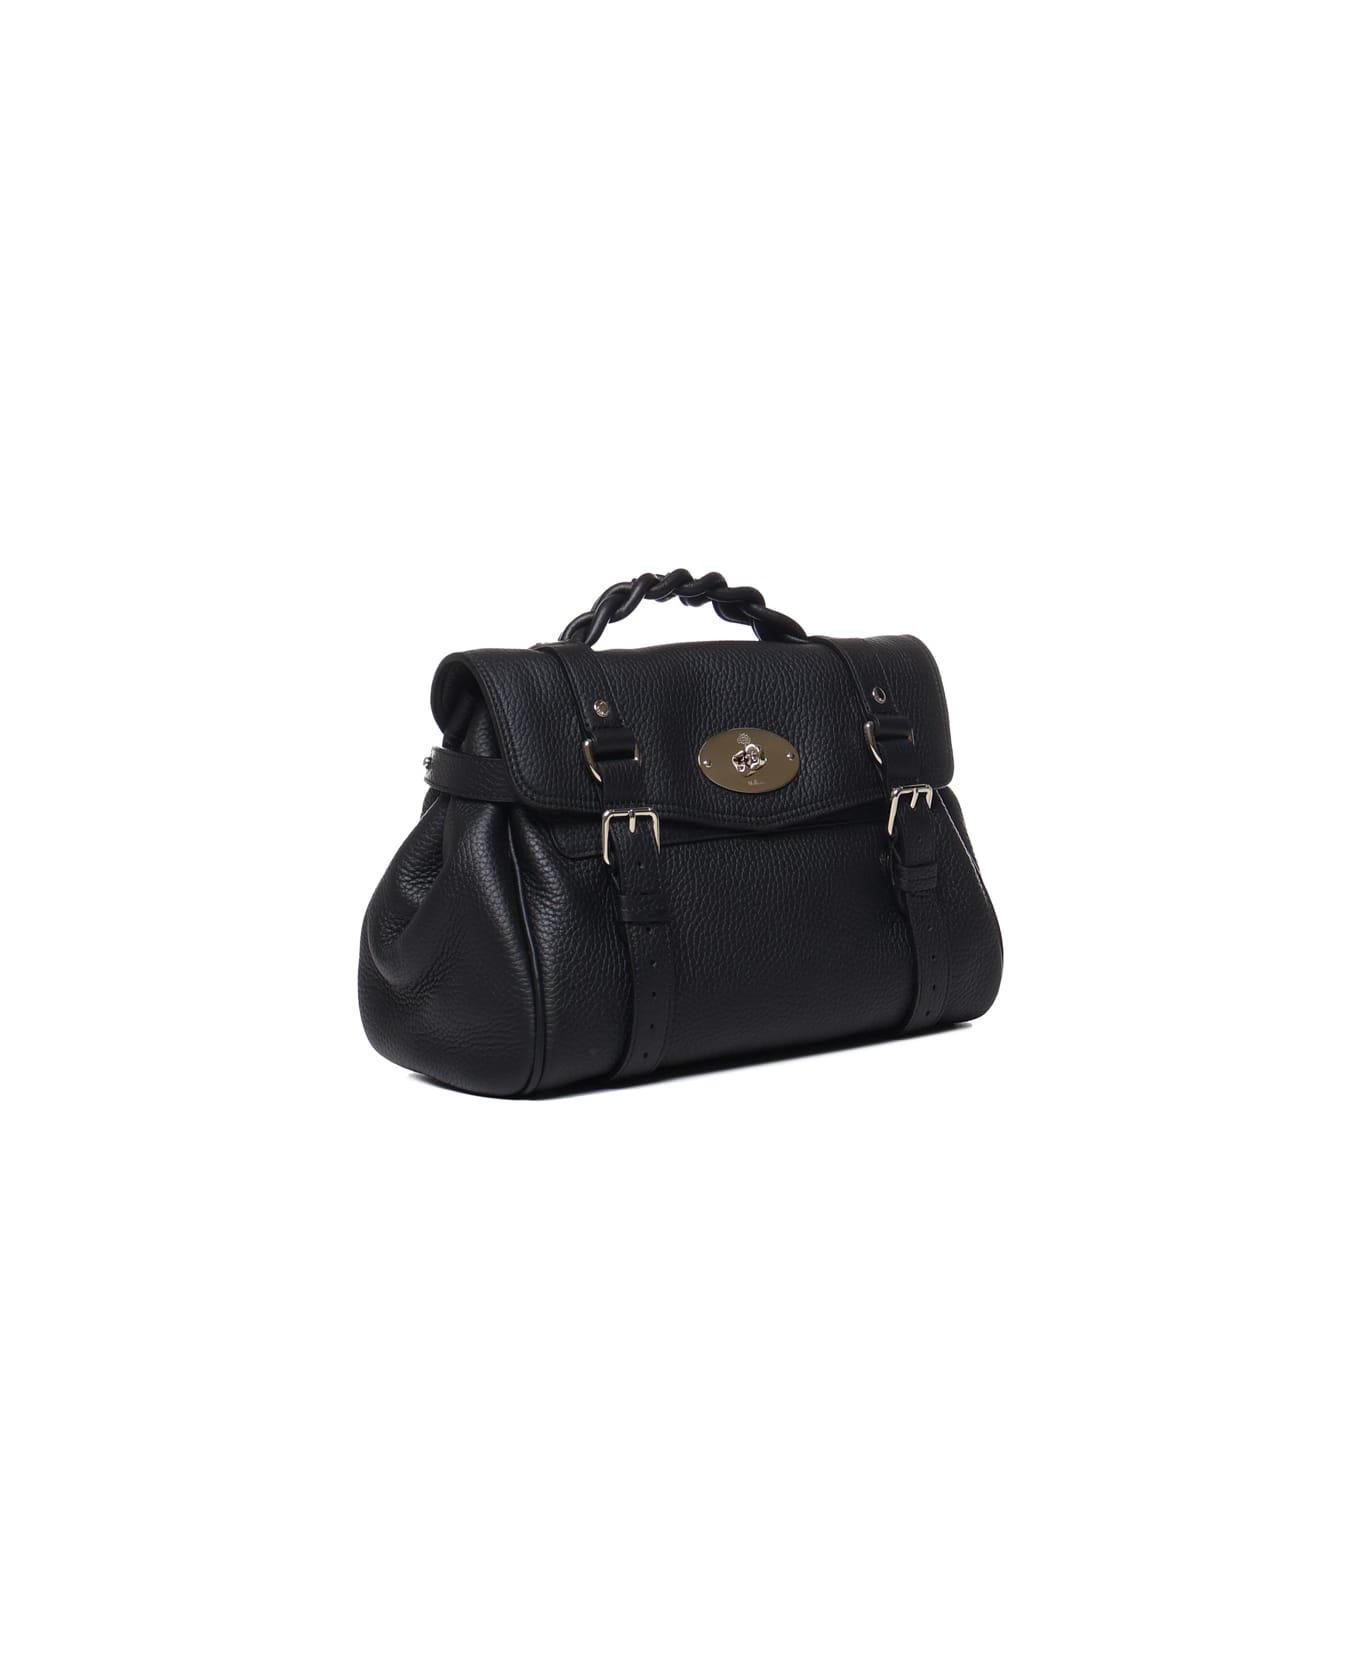 Mulberry Alexa Bag With Leather Braided Handle - Black